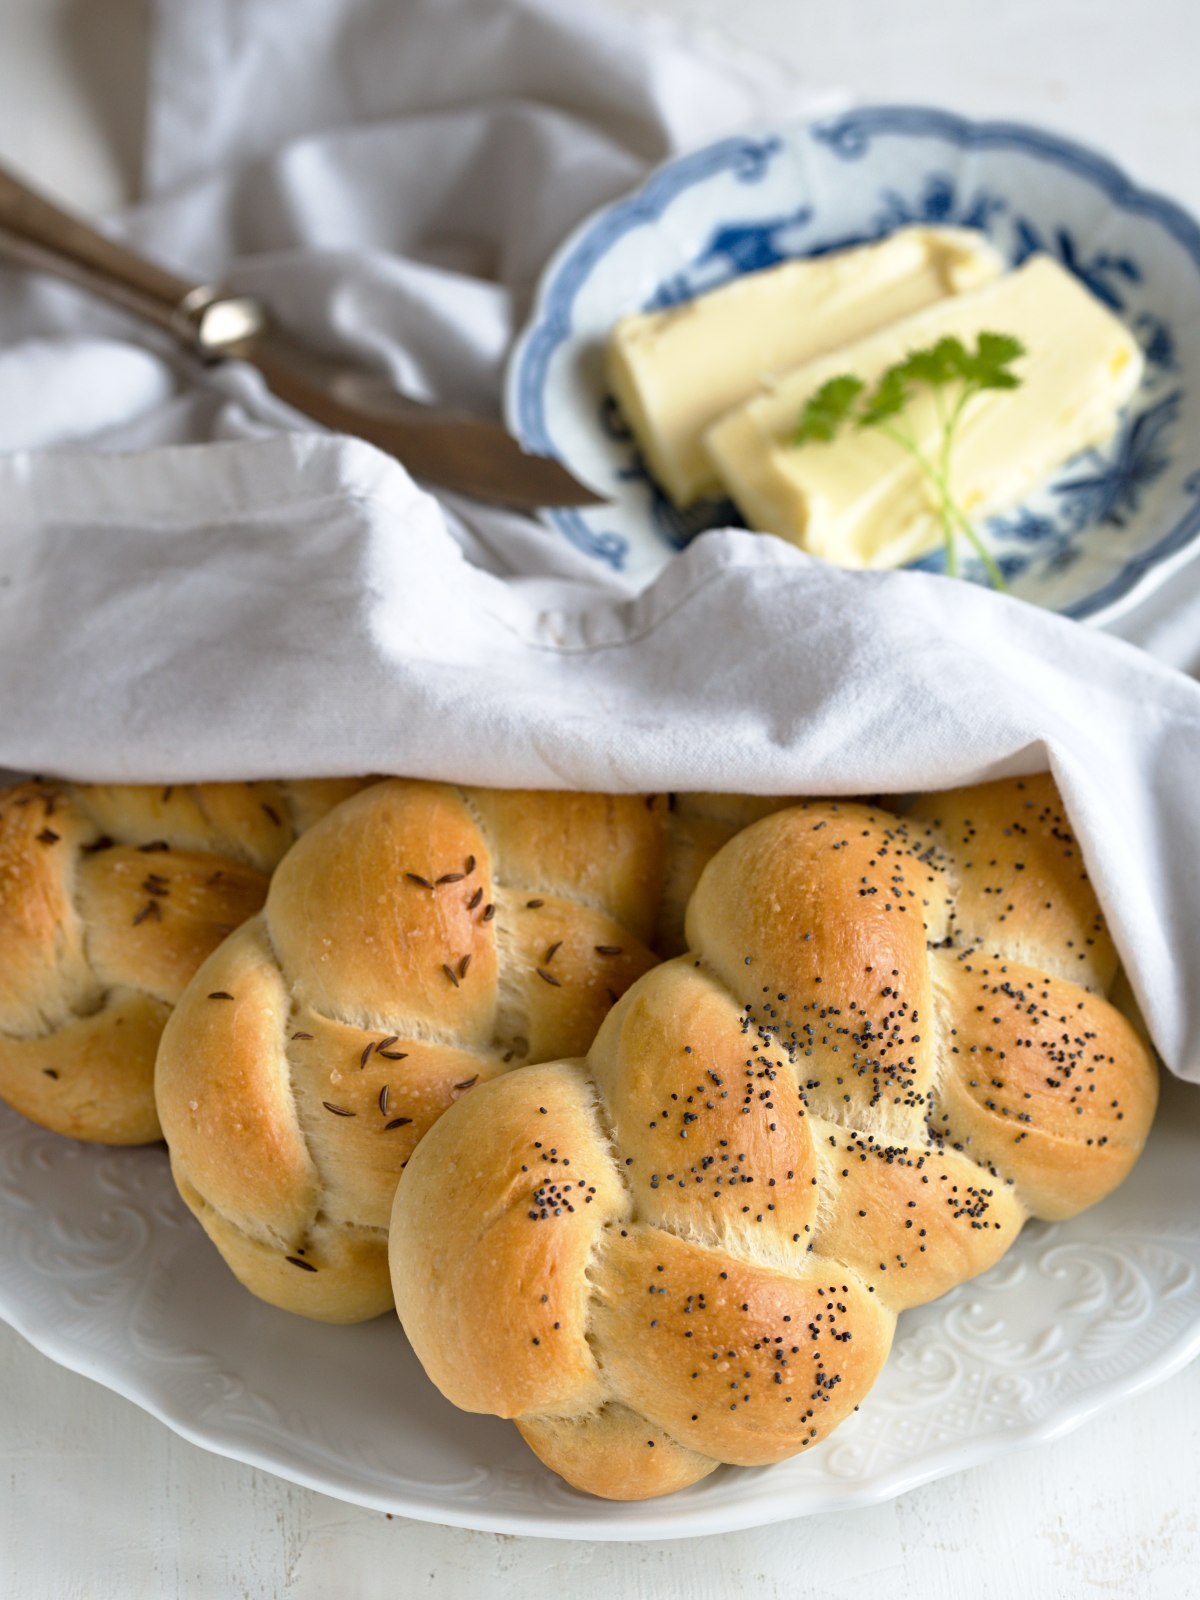 Housky braided rolls served on a plate.